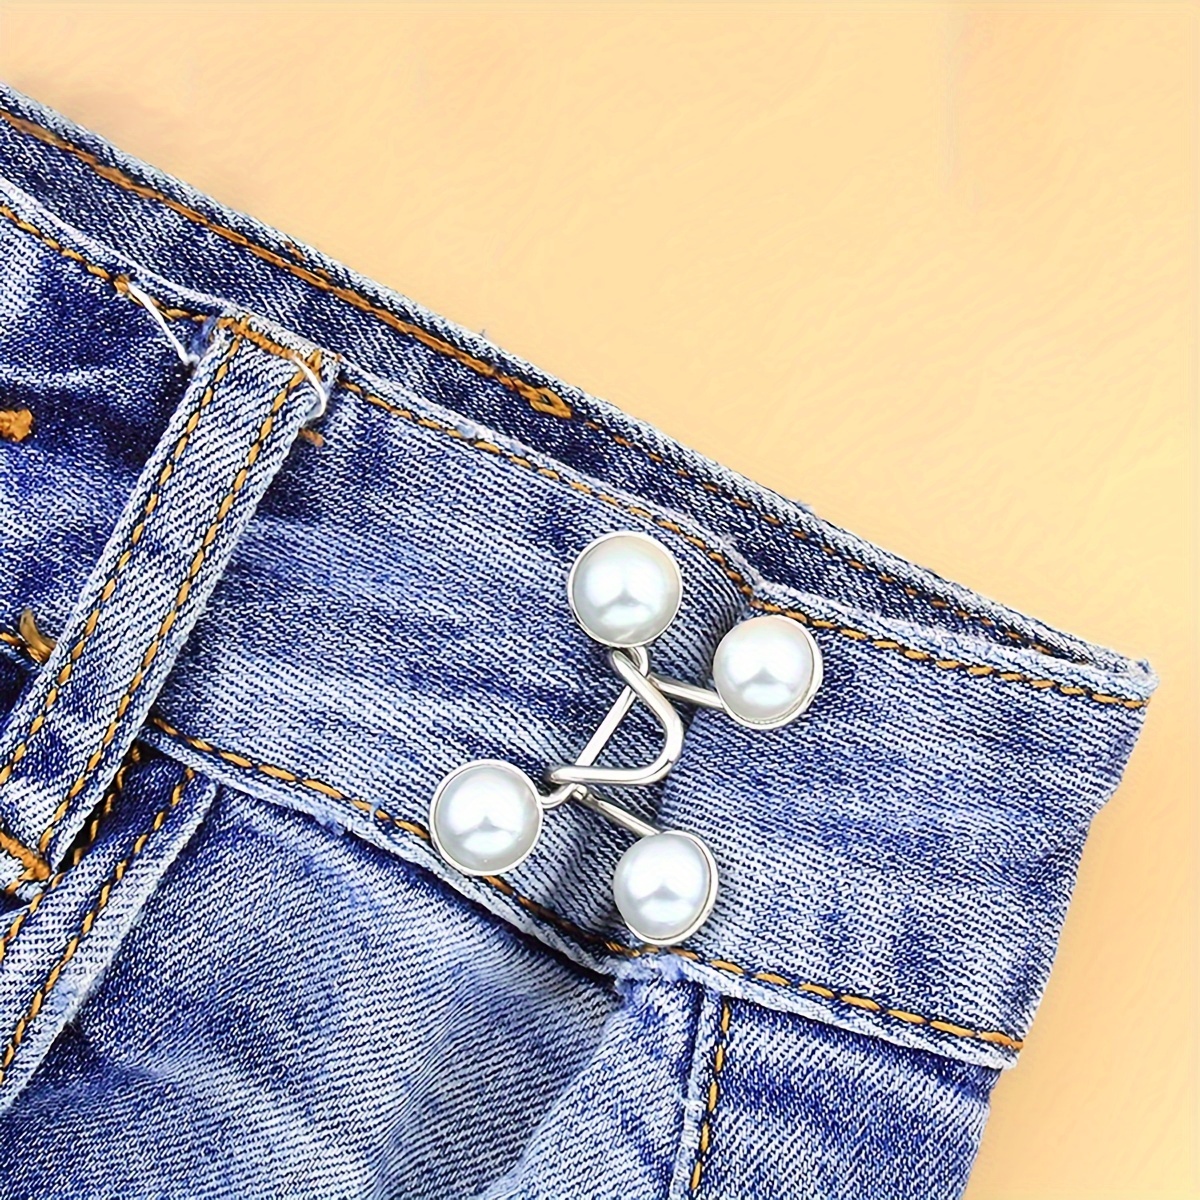 16 Sets Of Button Pin Jeans, Seamless Fit, Detachable Pants Button Pins,  Jeans Buttons